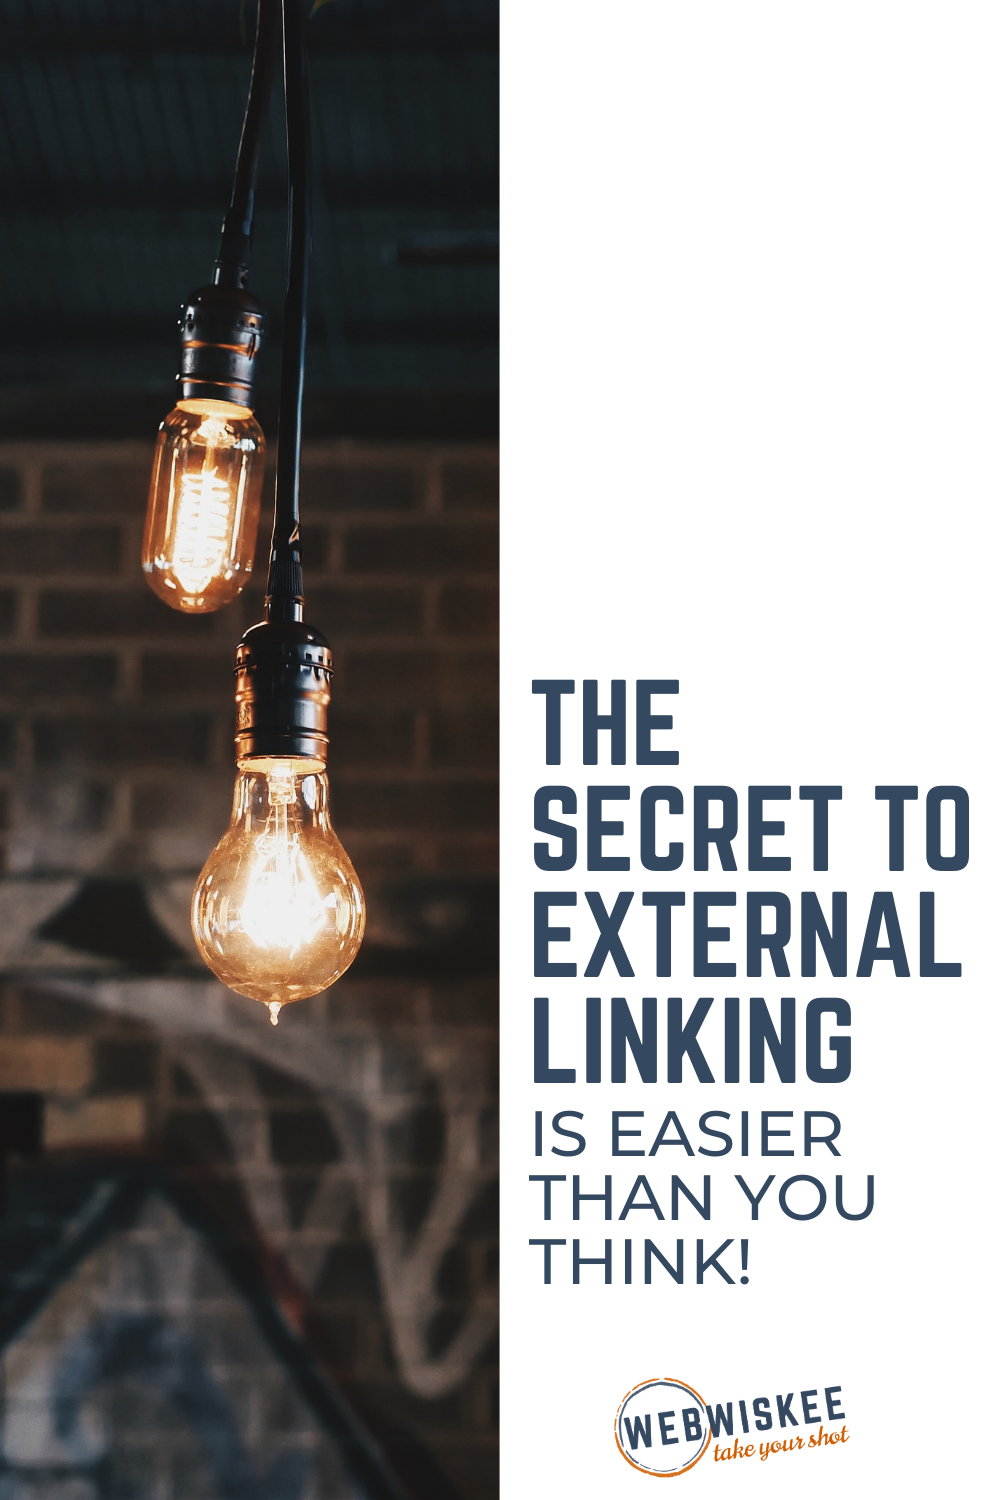 The secret to external linking is easier than you think by WebWiskee